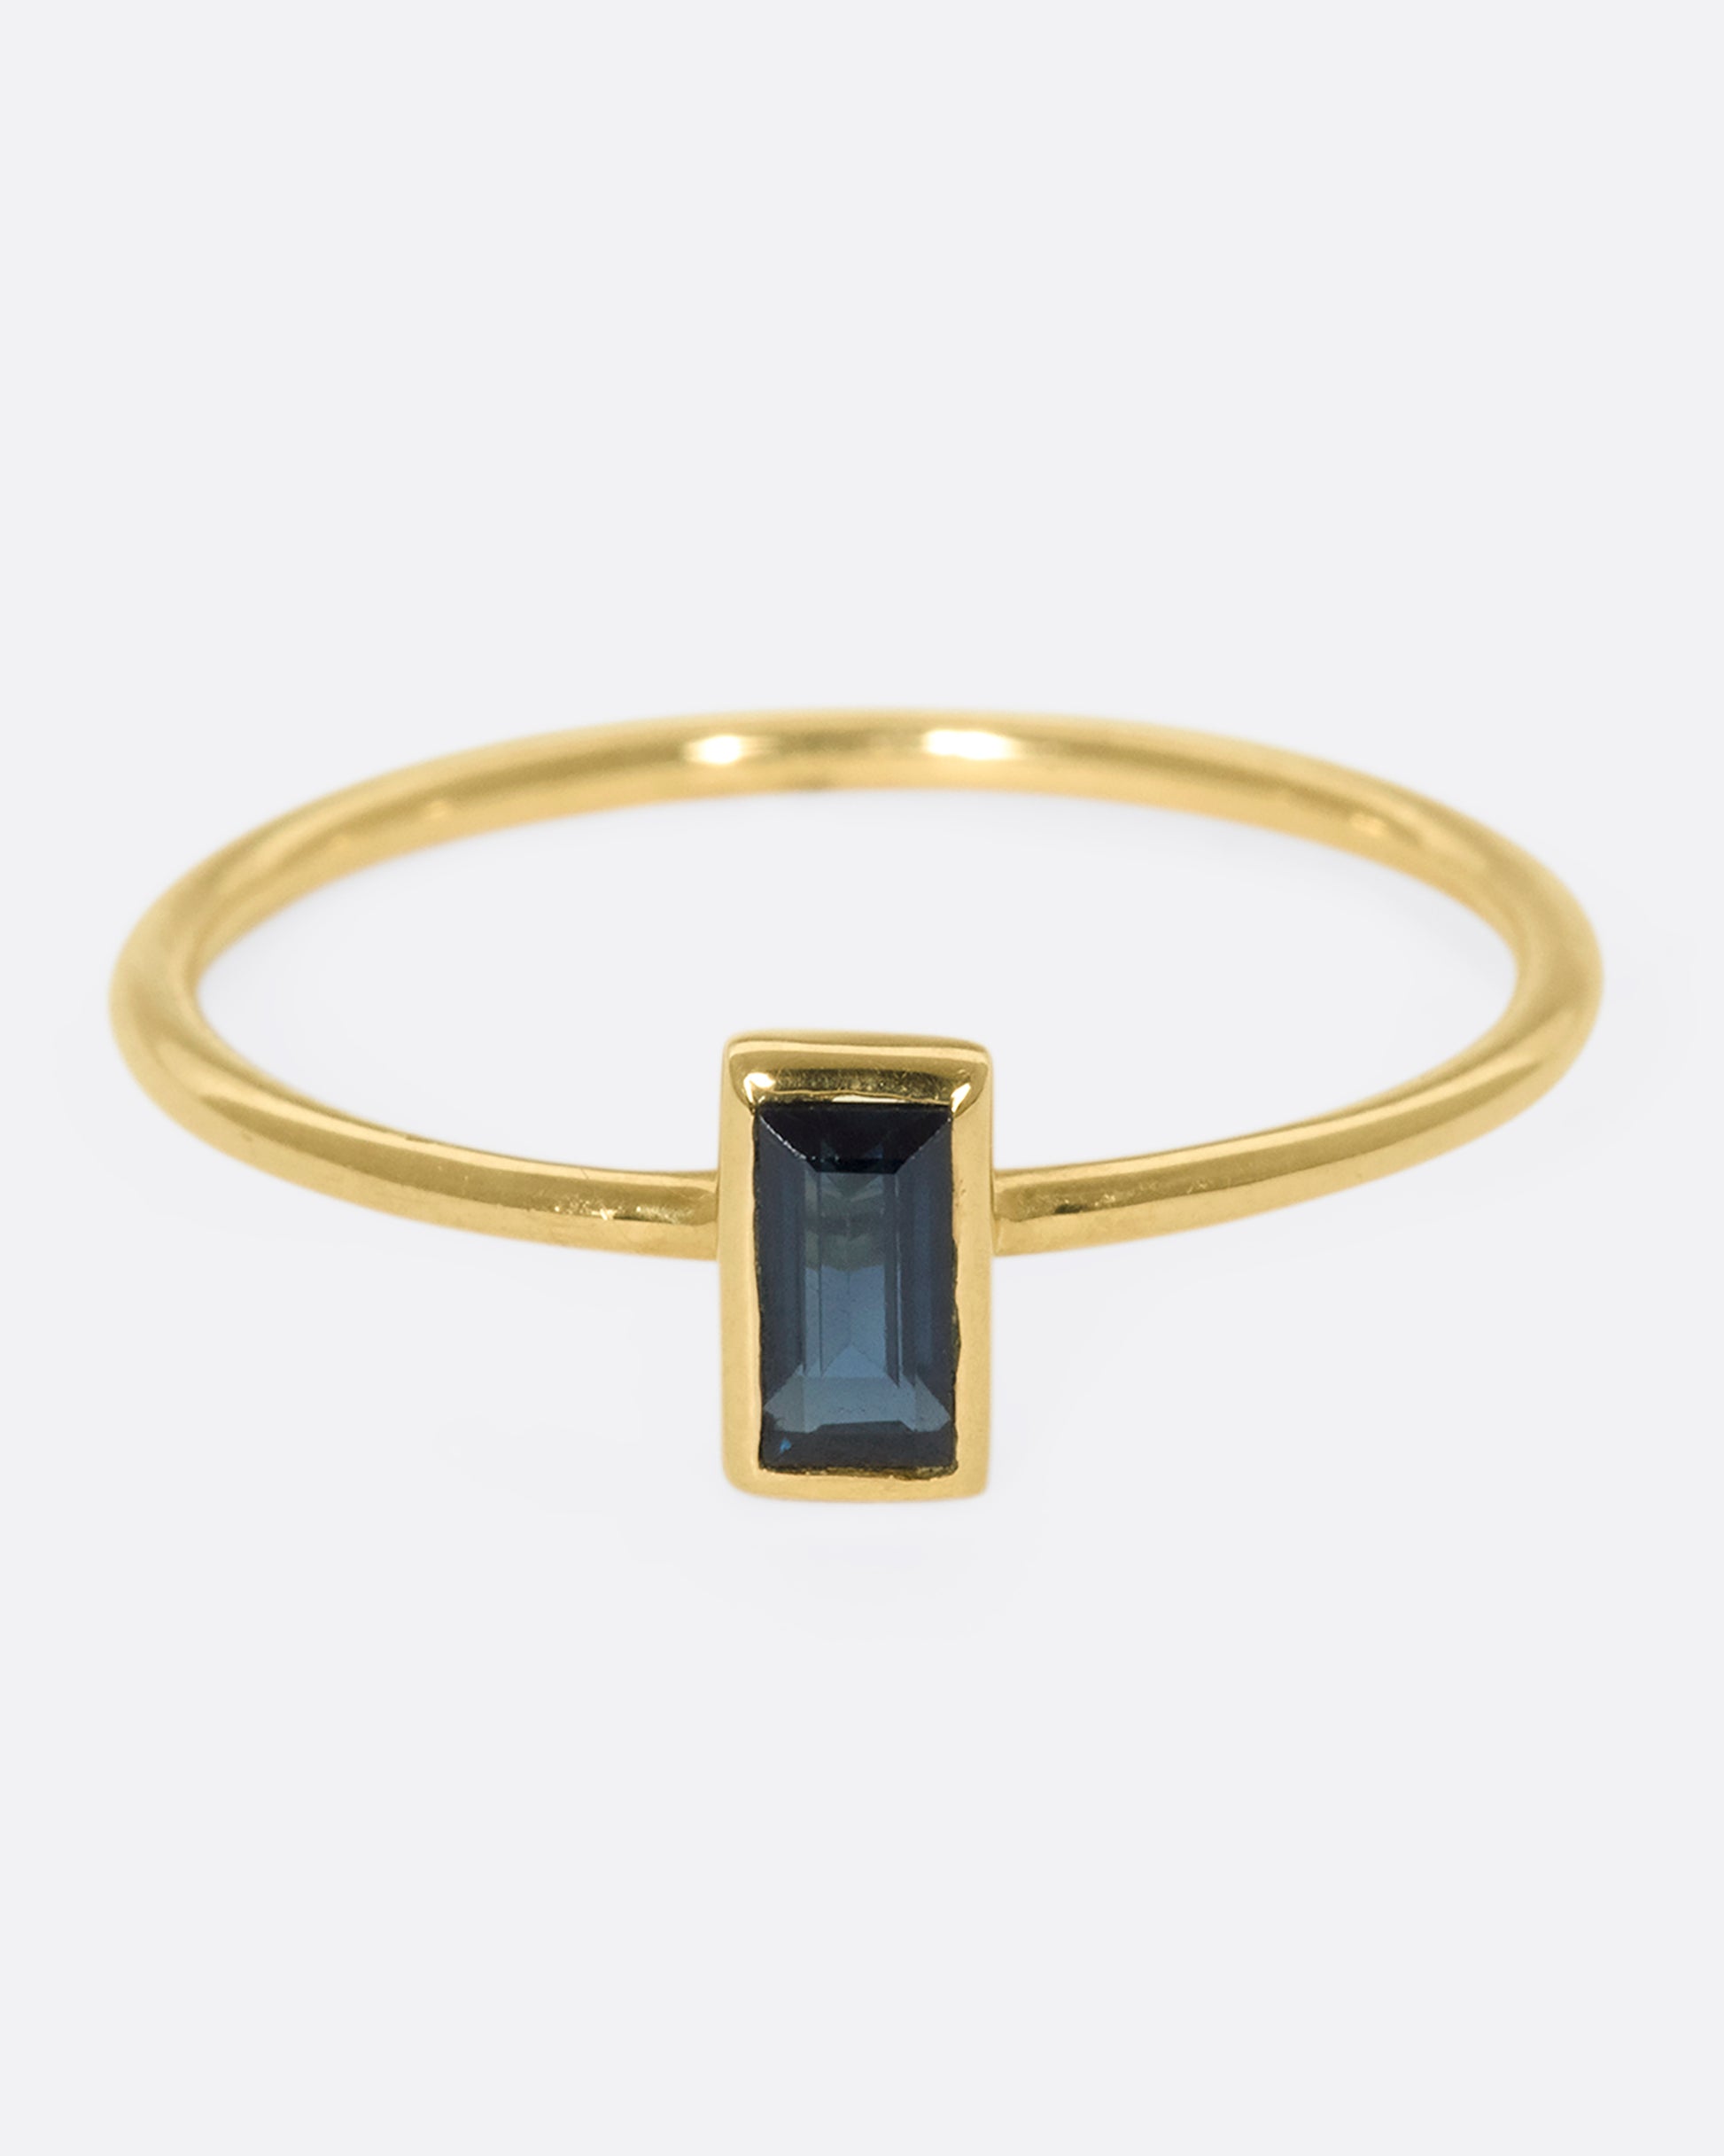 A 9k gold stacking ring with a vertical, bezel-set blue sapphire baguette